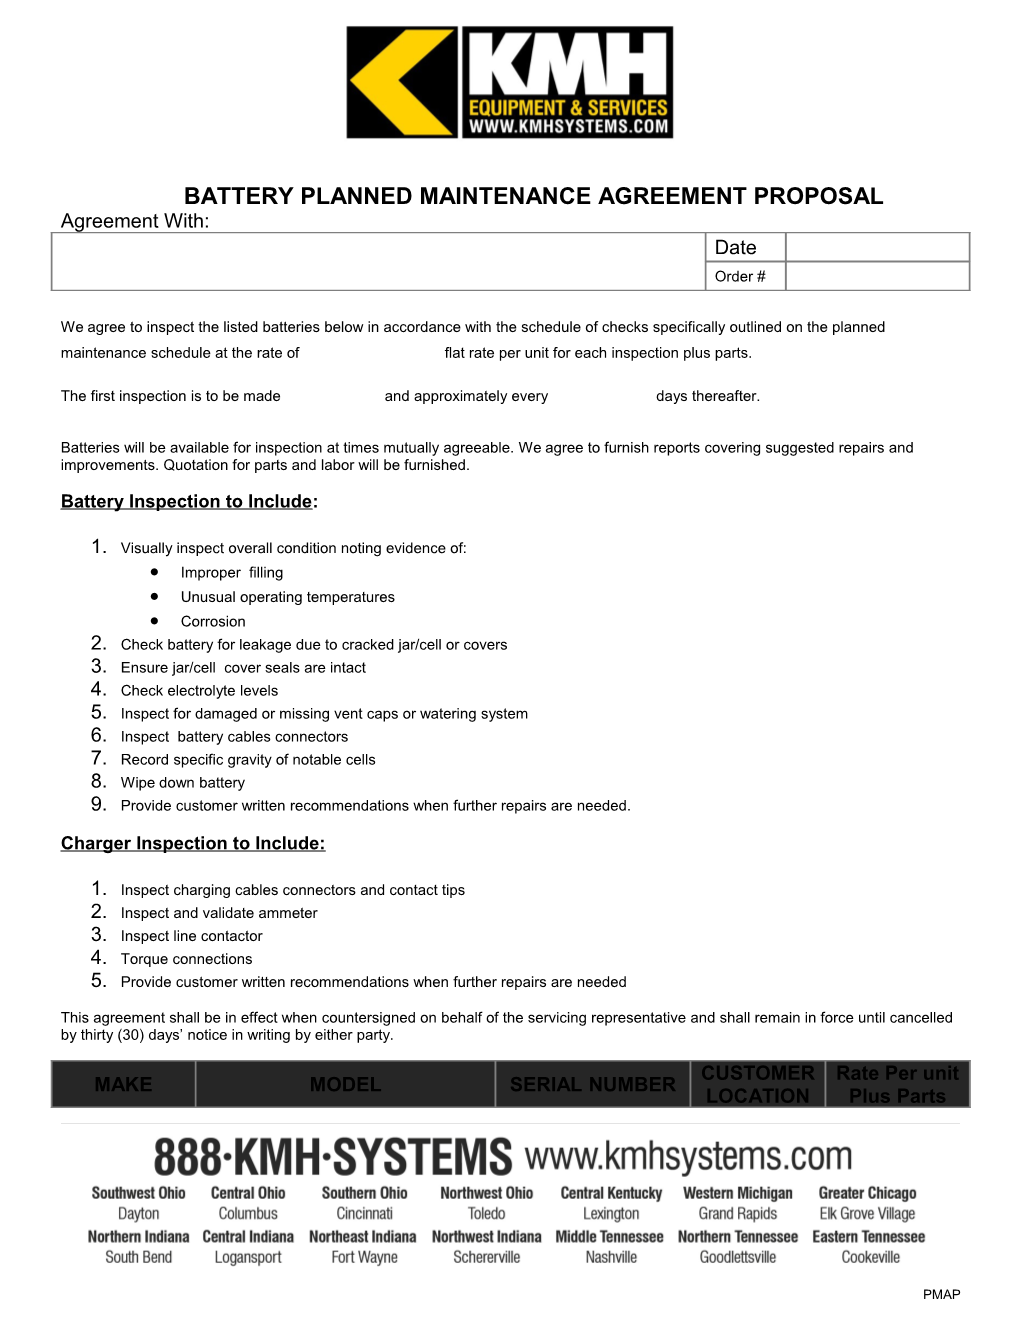 BATTERY PLANNED MAINTENANCE AGREEMENT PROPOSAL Agreement With